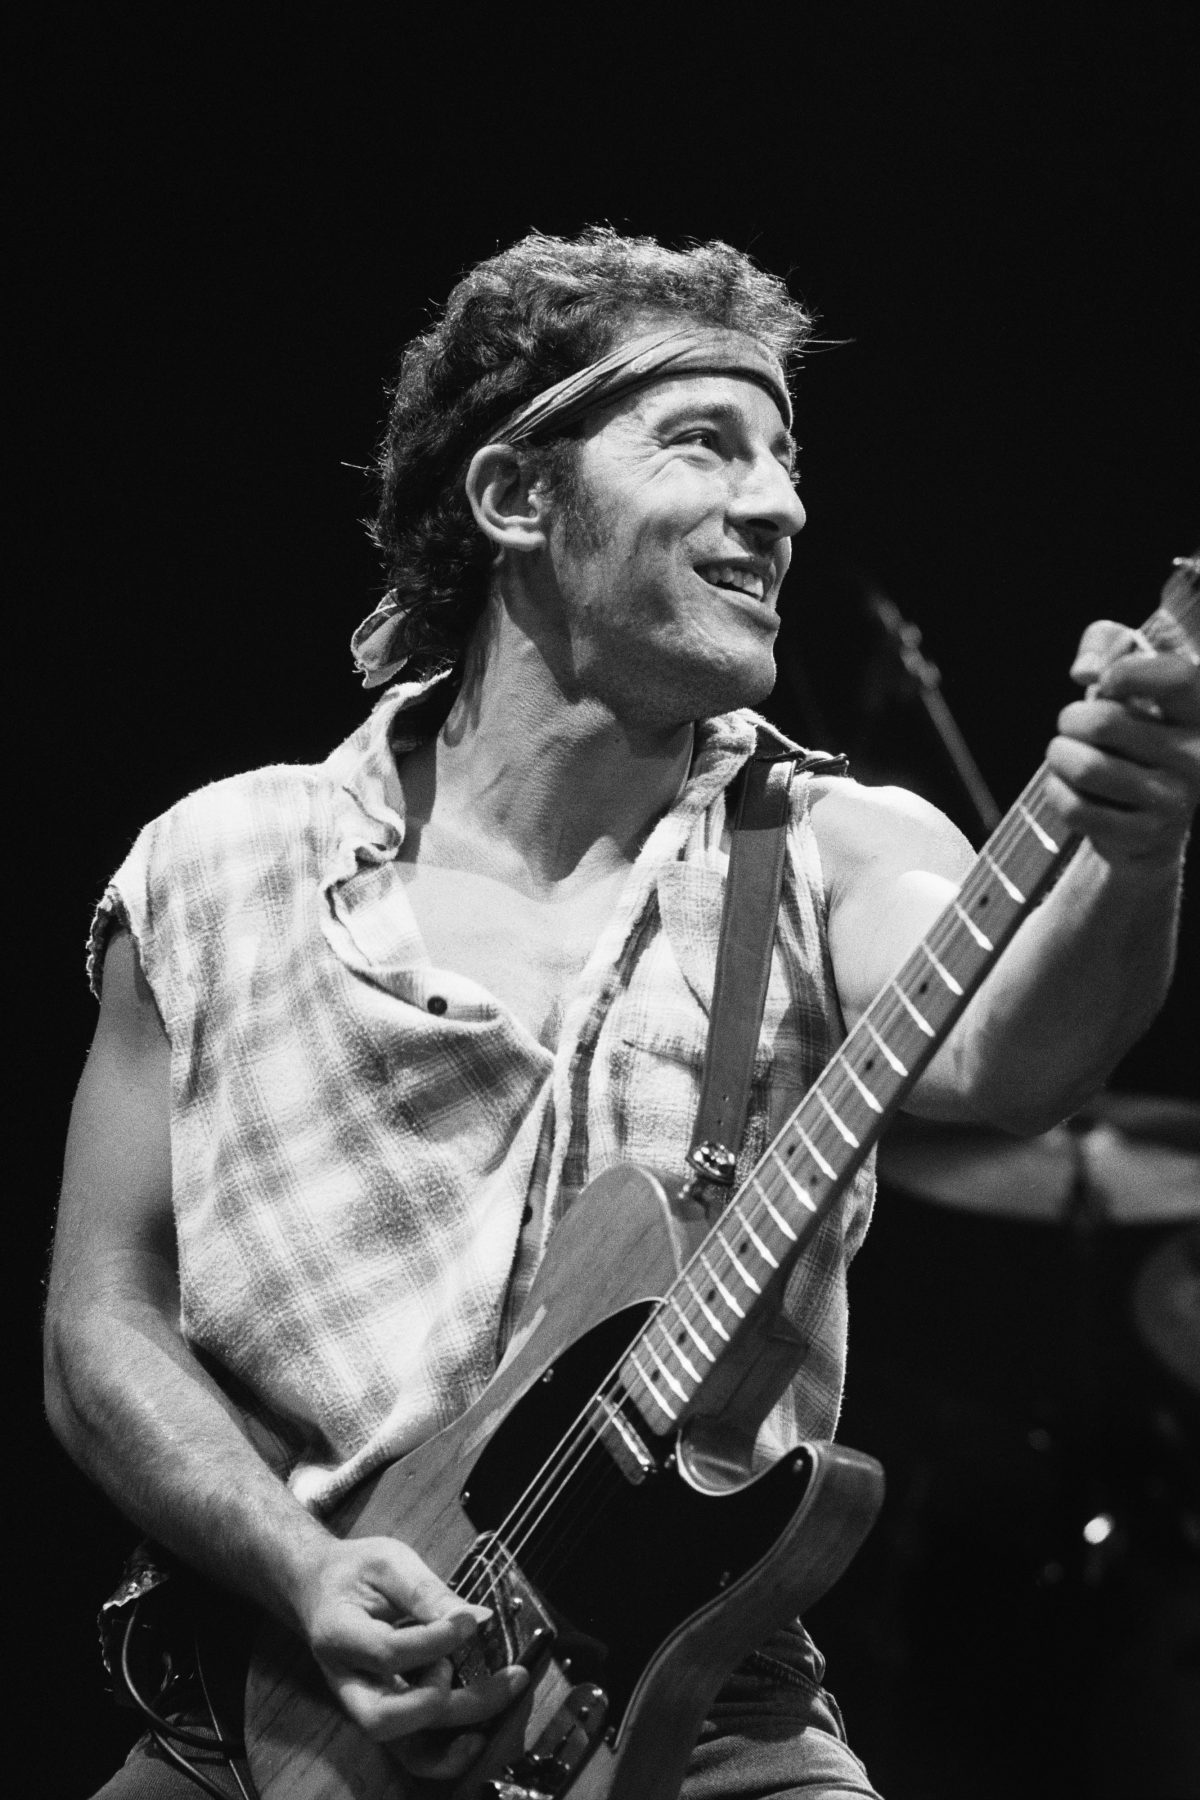 Bruce Springsteen at the Meadowlands, New Jersey in August 1984...